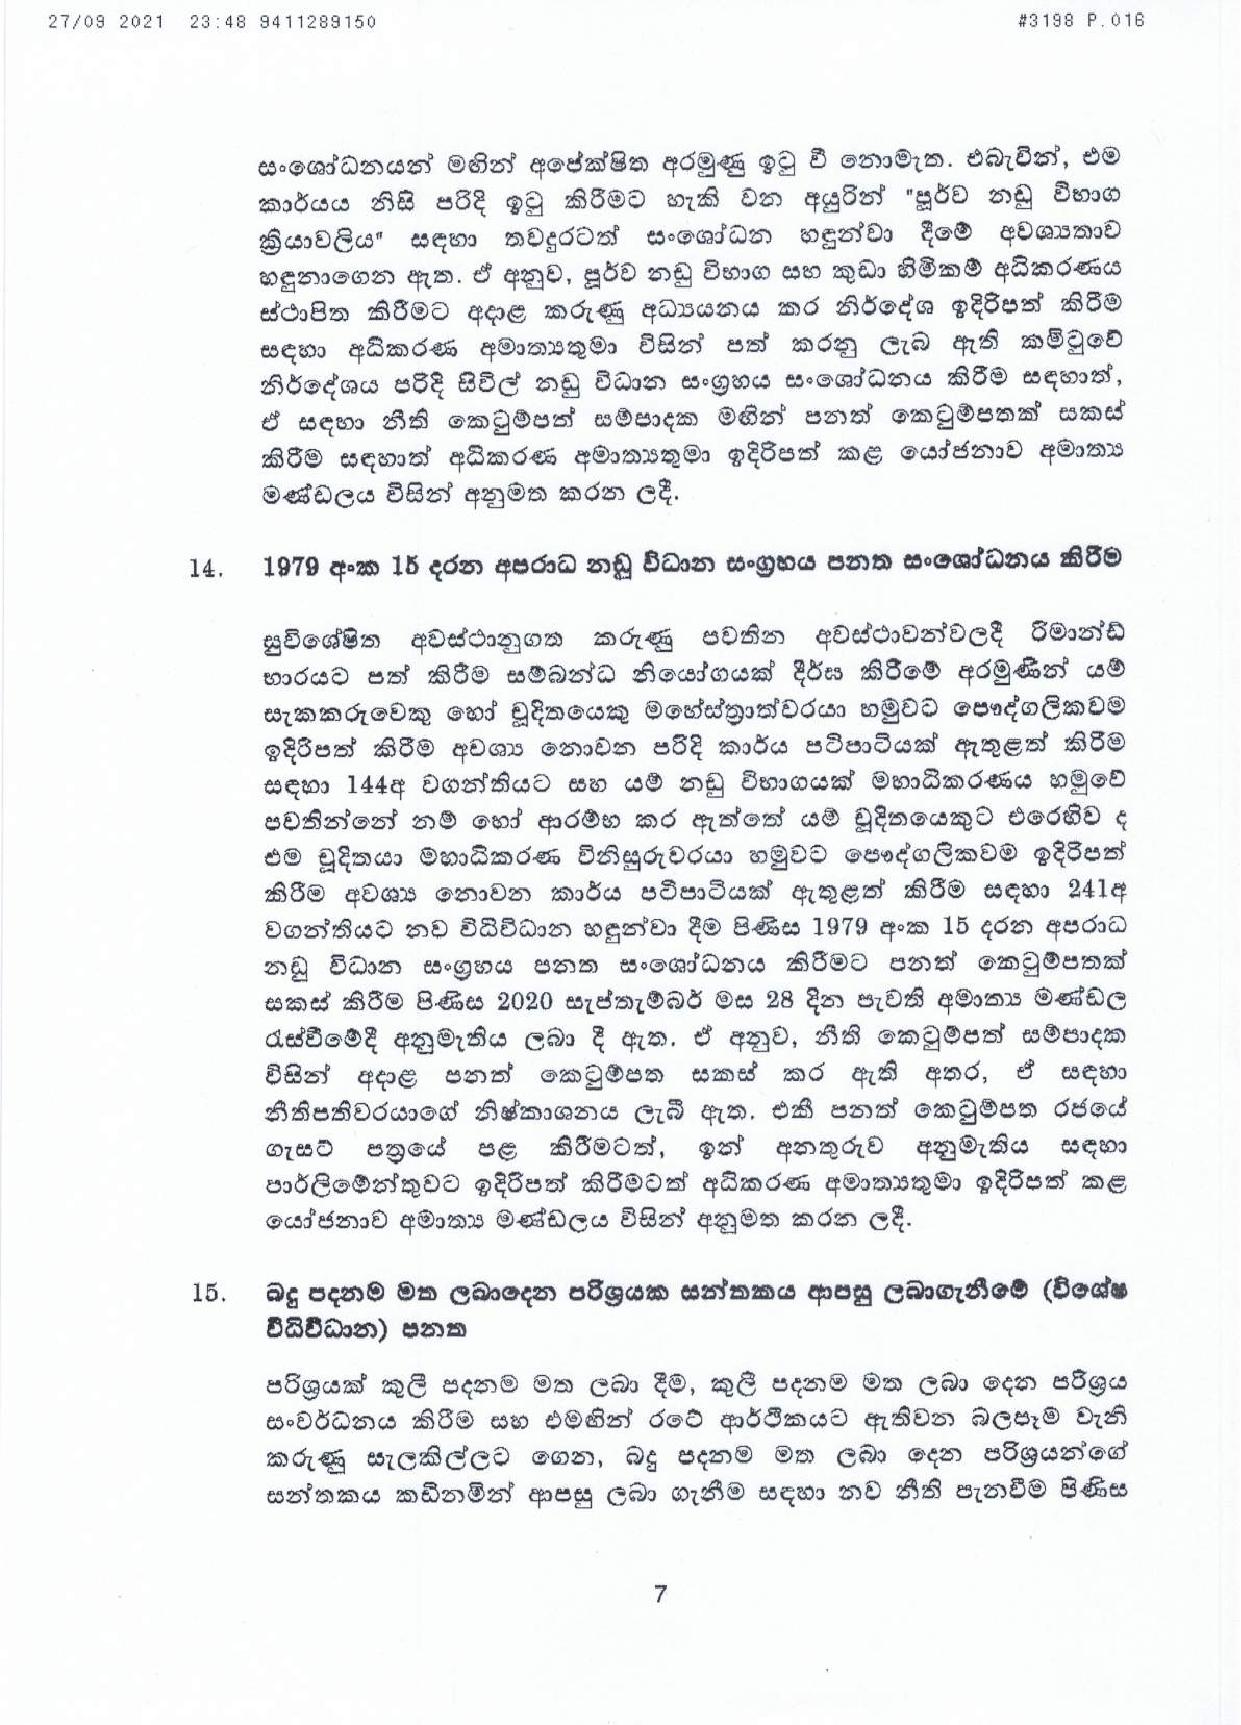 Cabinet Decisions on 27.09.2021 Sinhala page 007